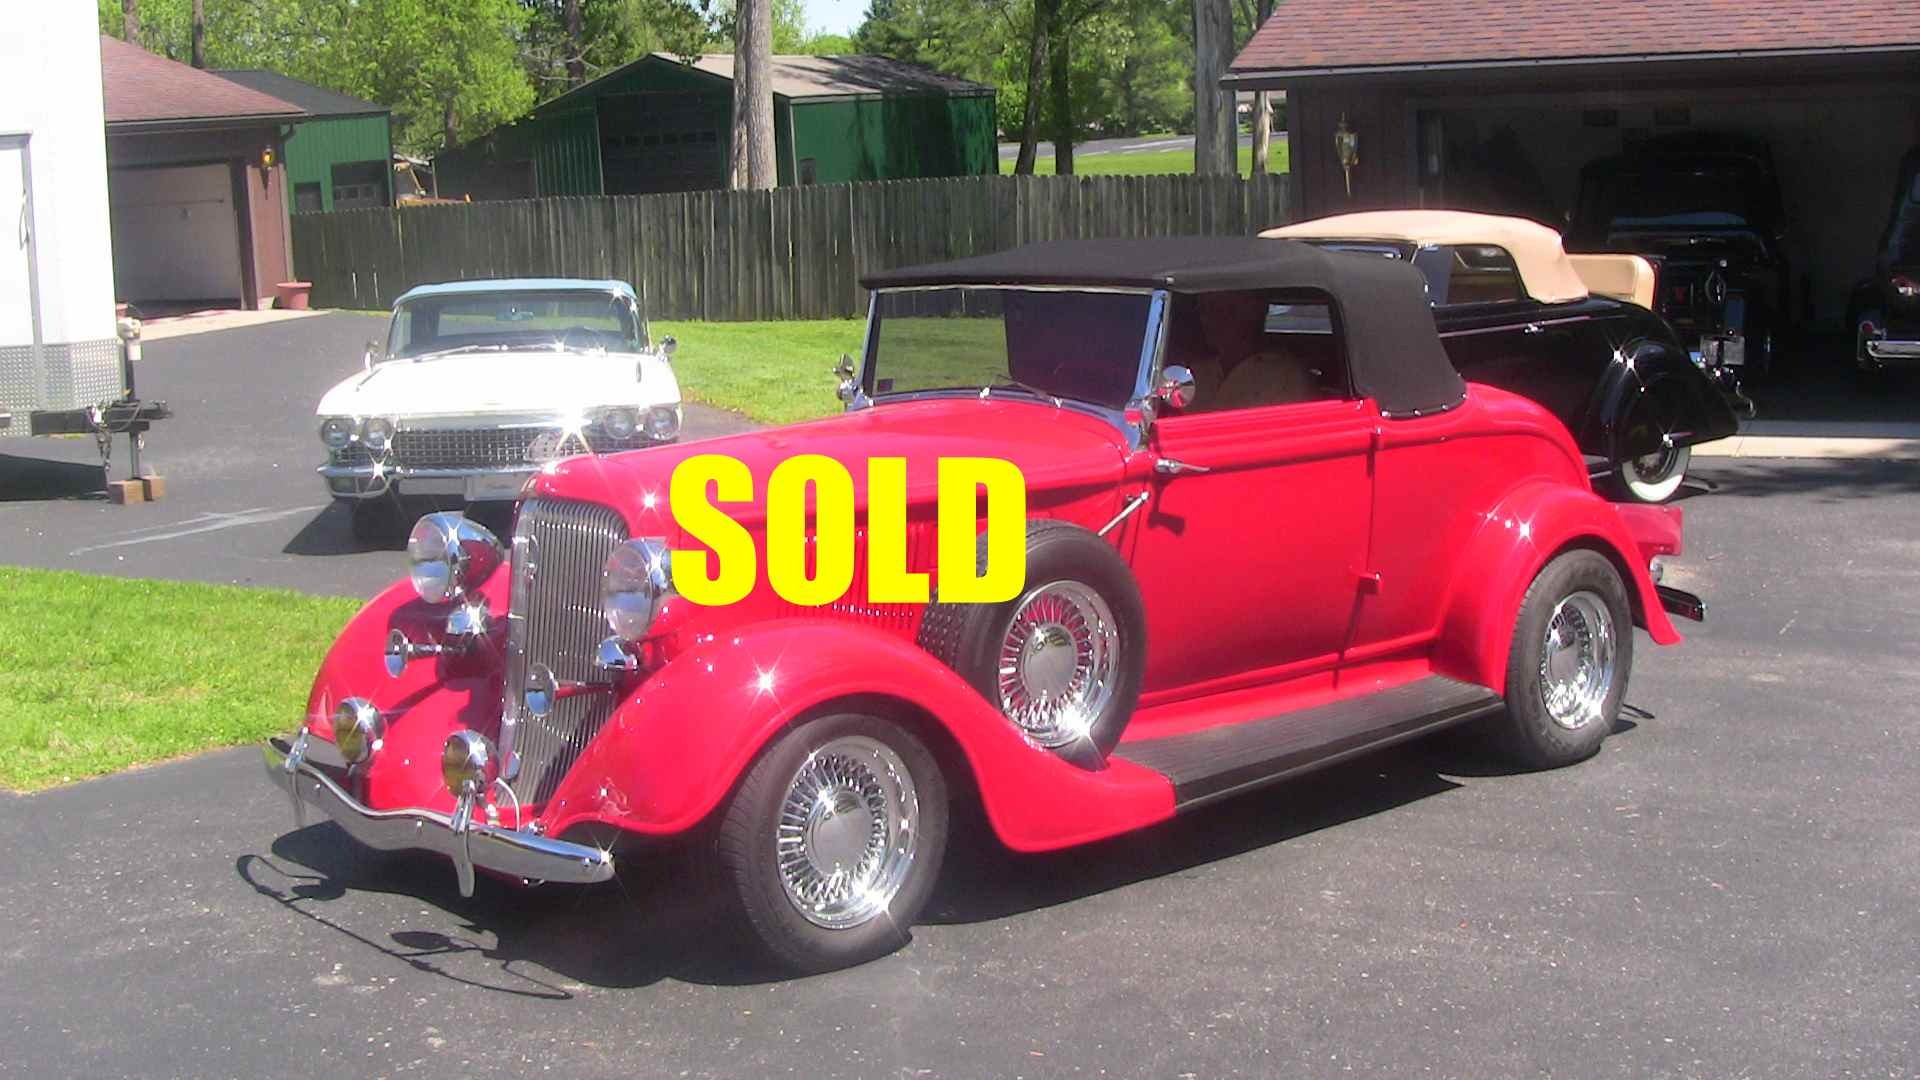 Used 1934 Plymouth PE  64 , For Sale $59900, Call Us: (704) 996-3735